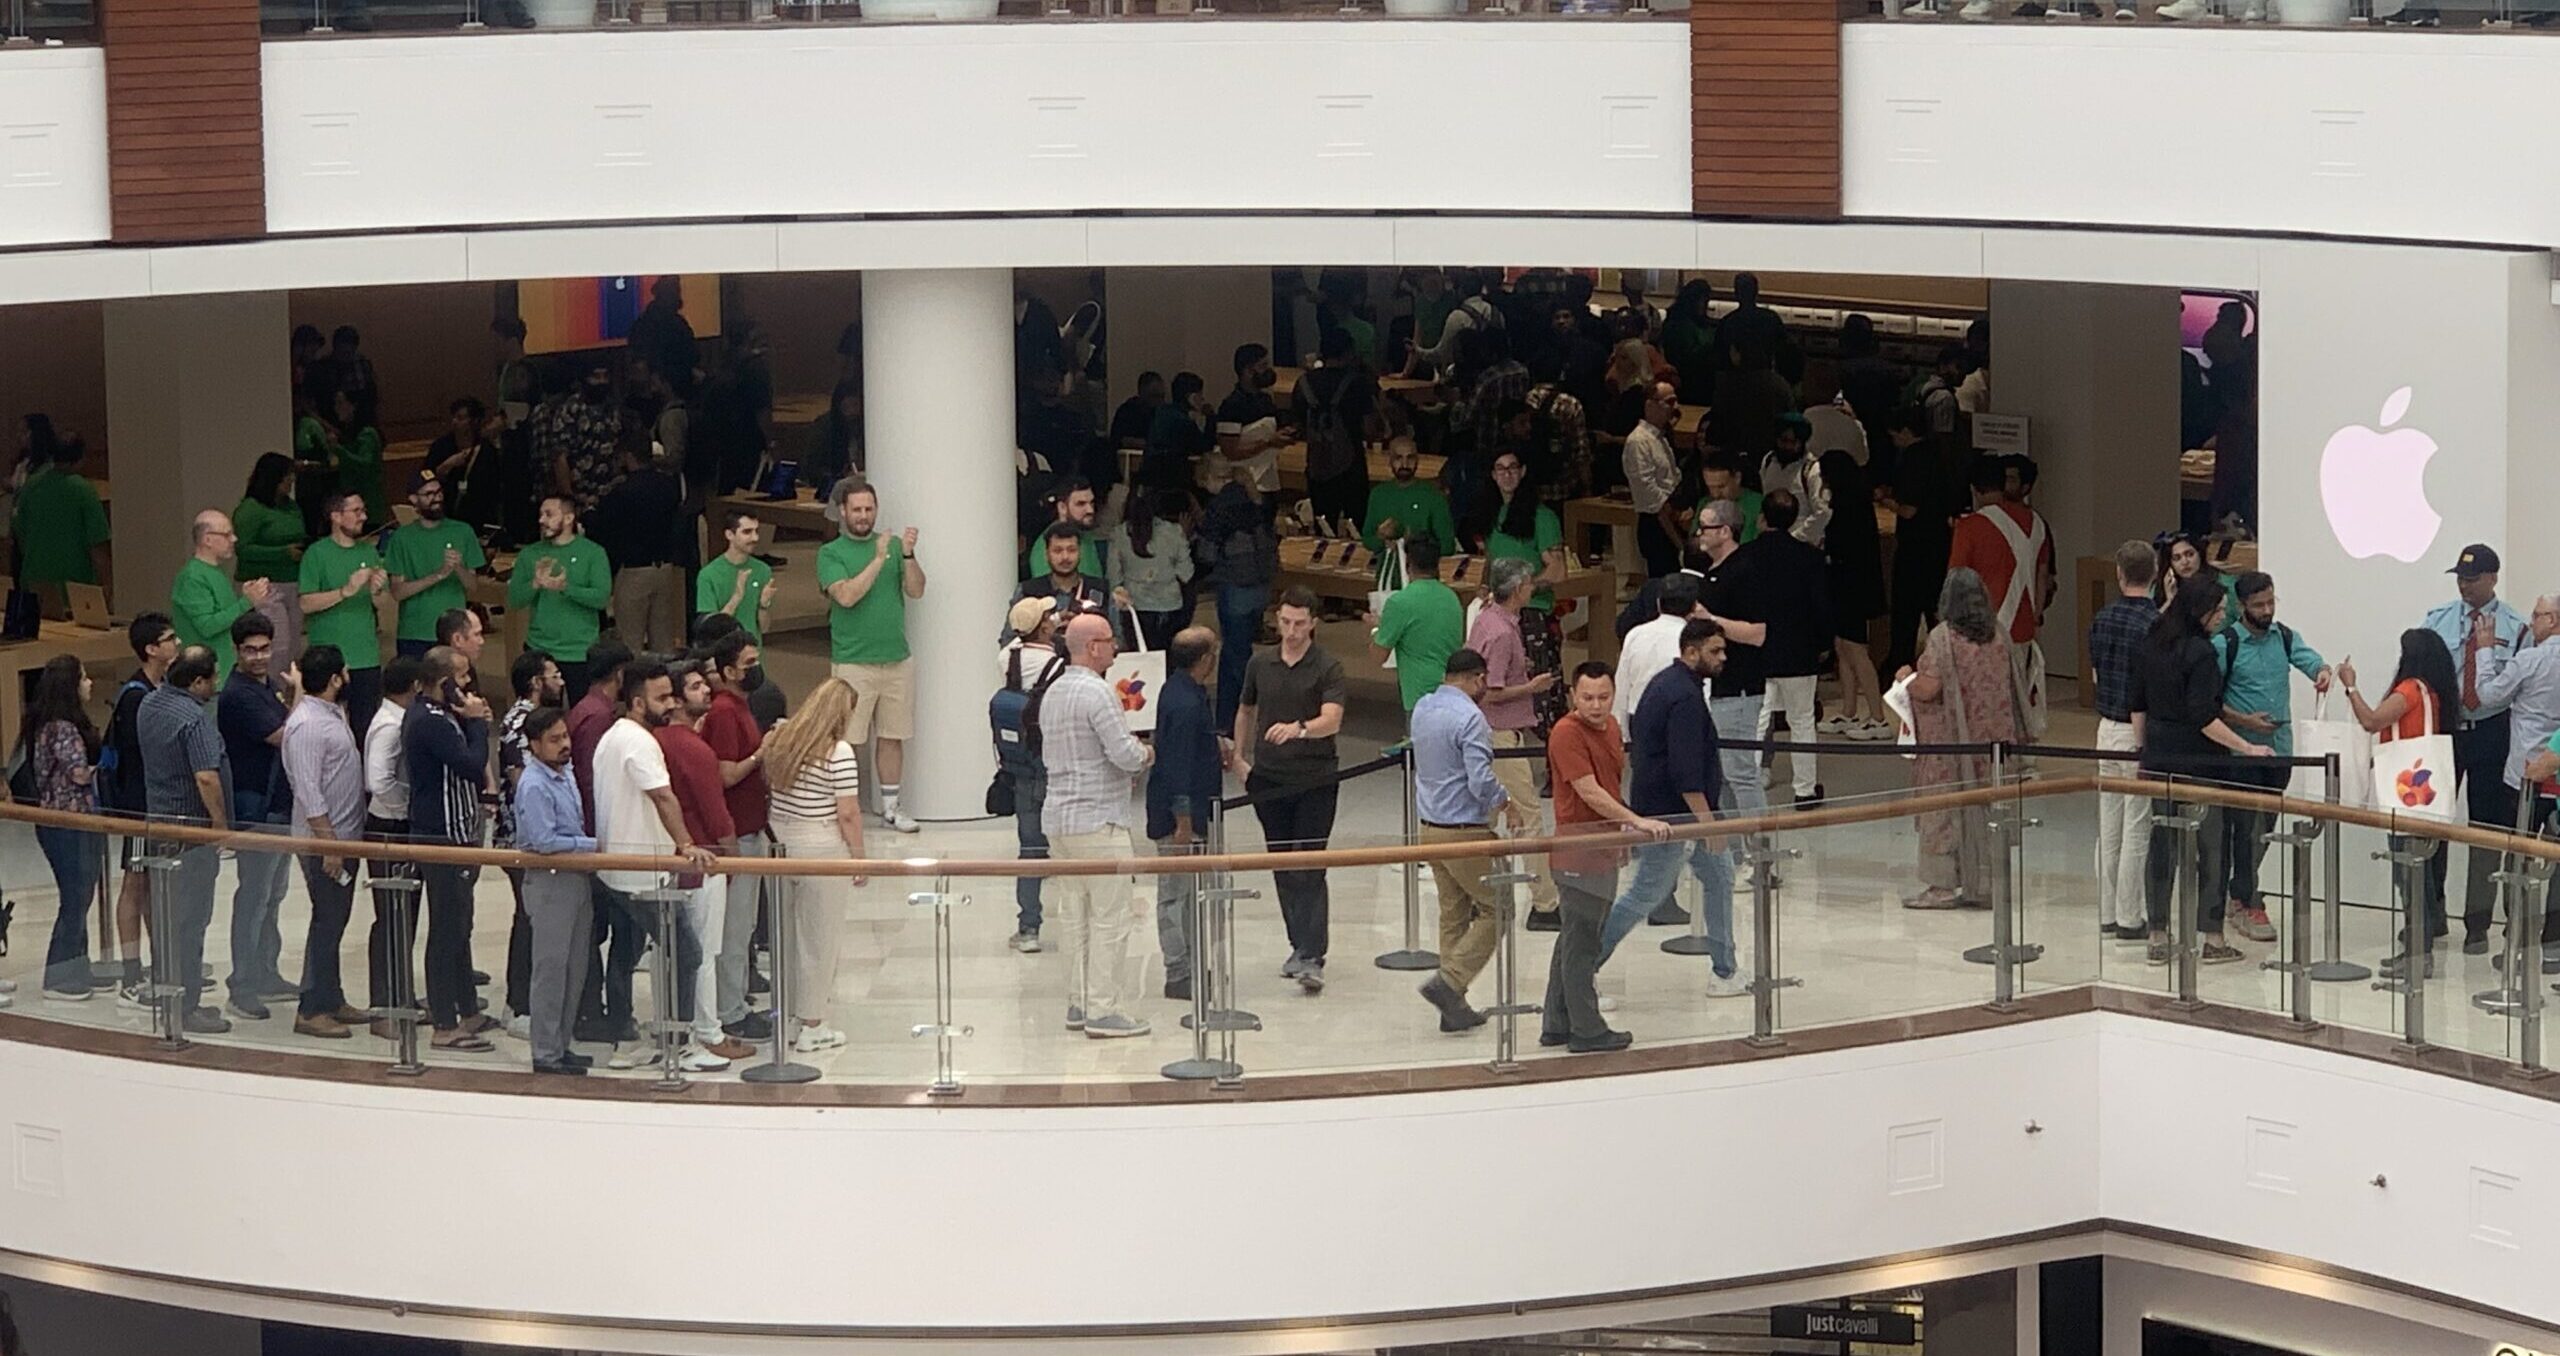 Apple Saket opens to fanfare - and chaos